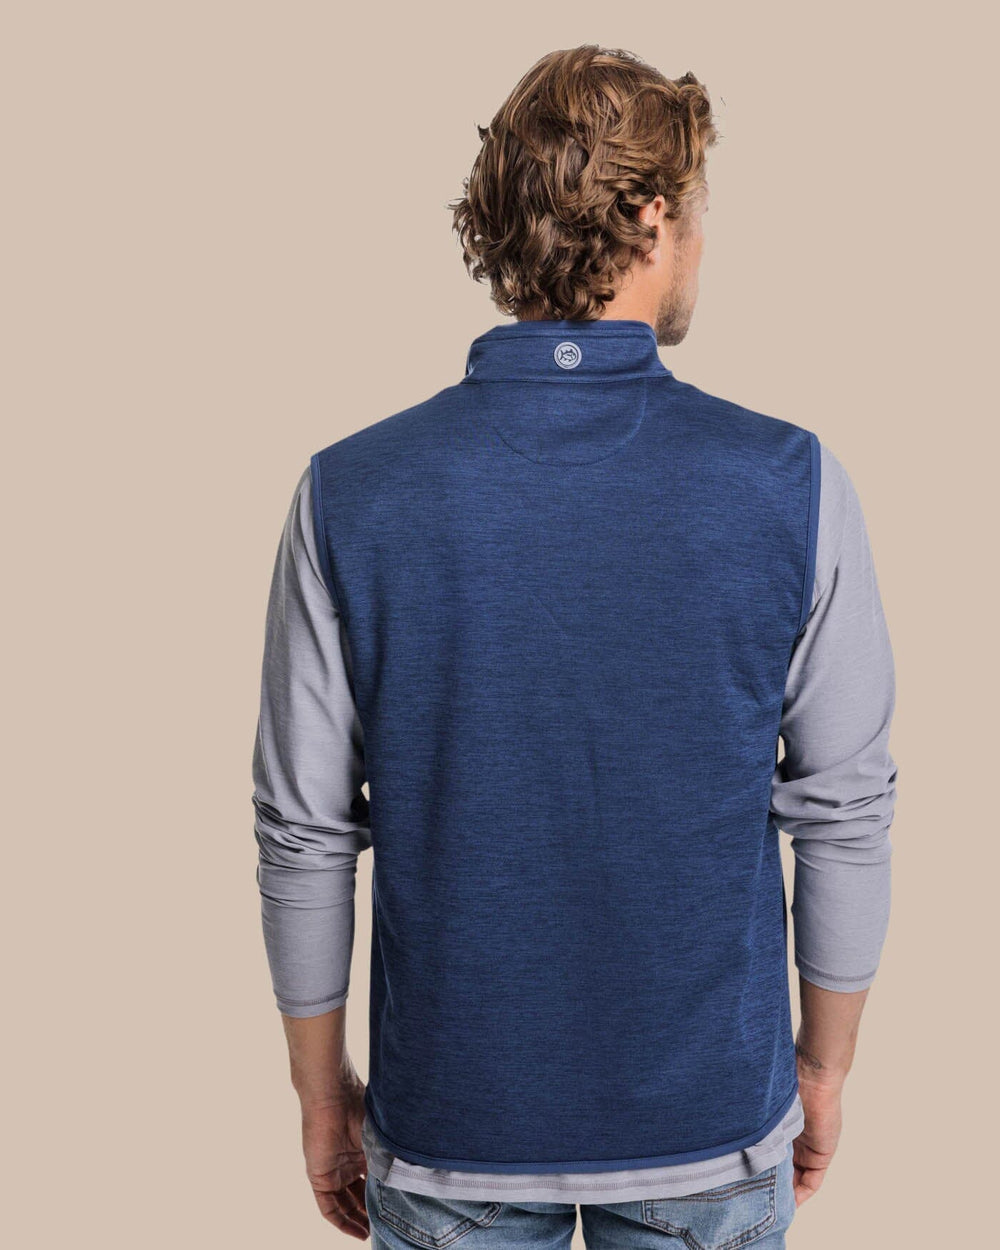 The back view of the Southern Tide Baybrook Heather Vest by Southern Tide - Heather Navy